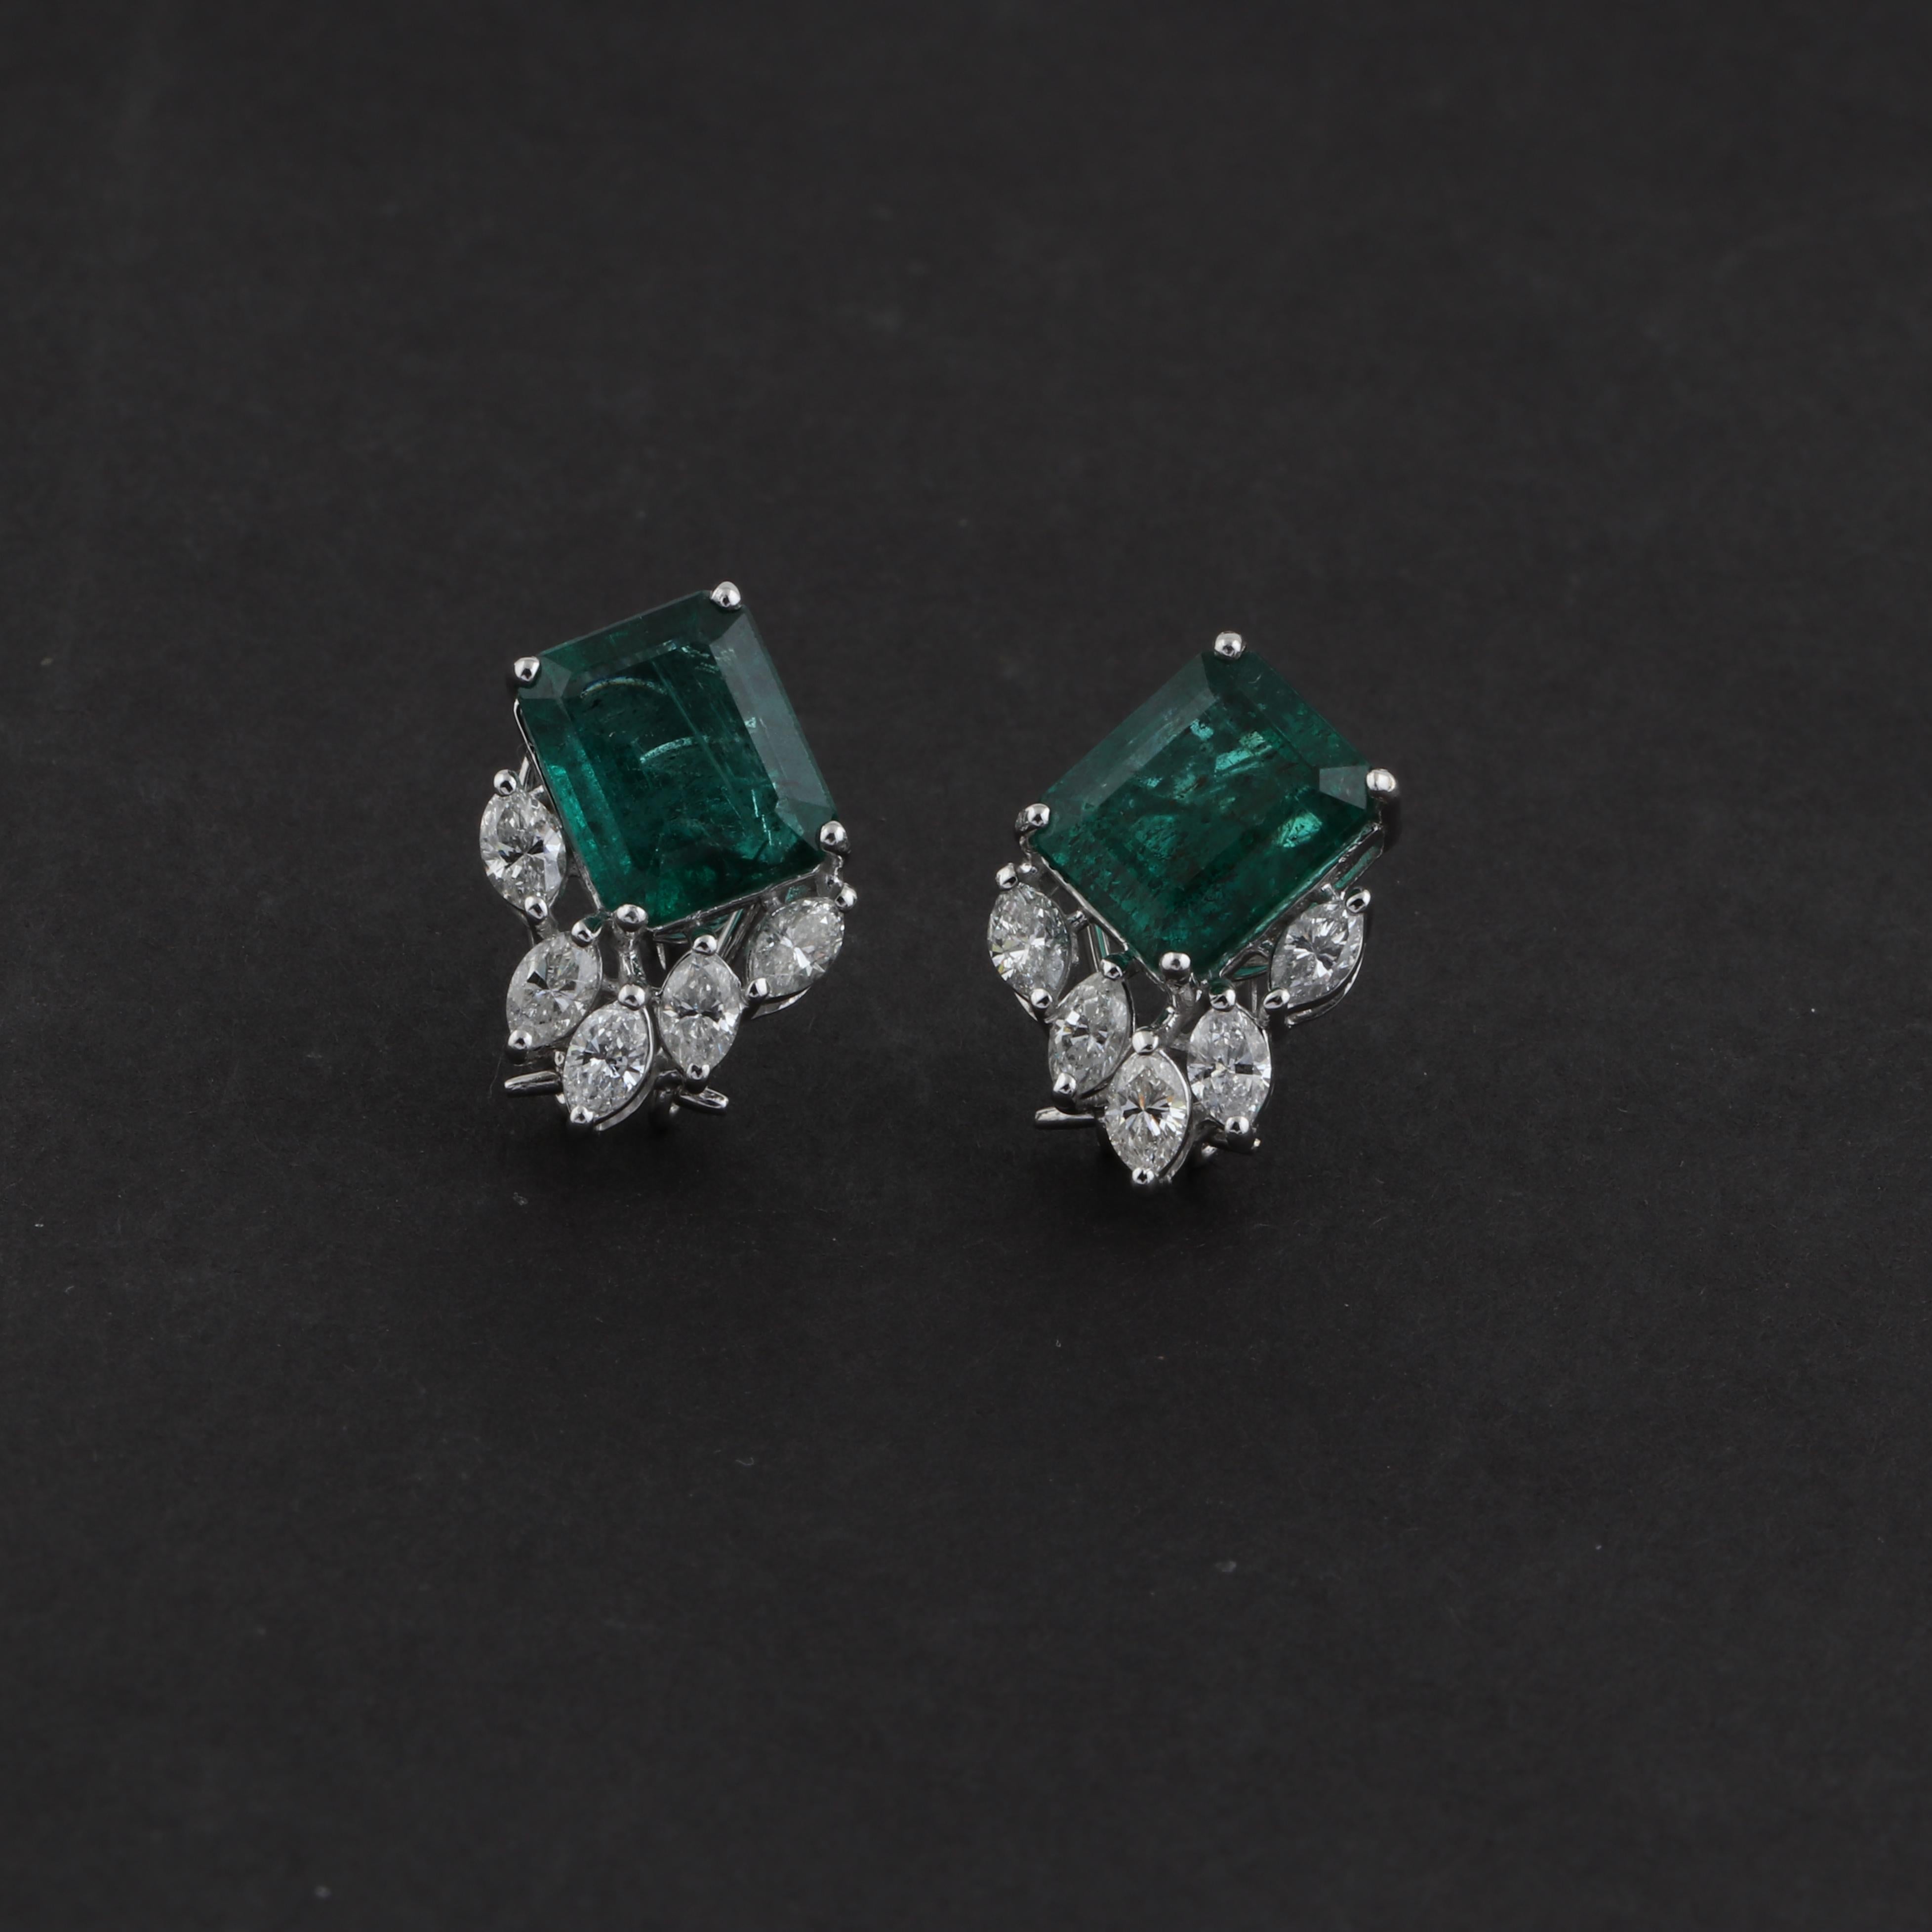 Processed Gemstone Stud Earrings Marquise Diamond Solid 18k White Gold Jewelry For Sale 1